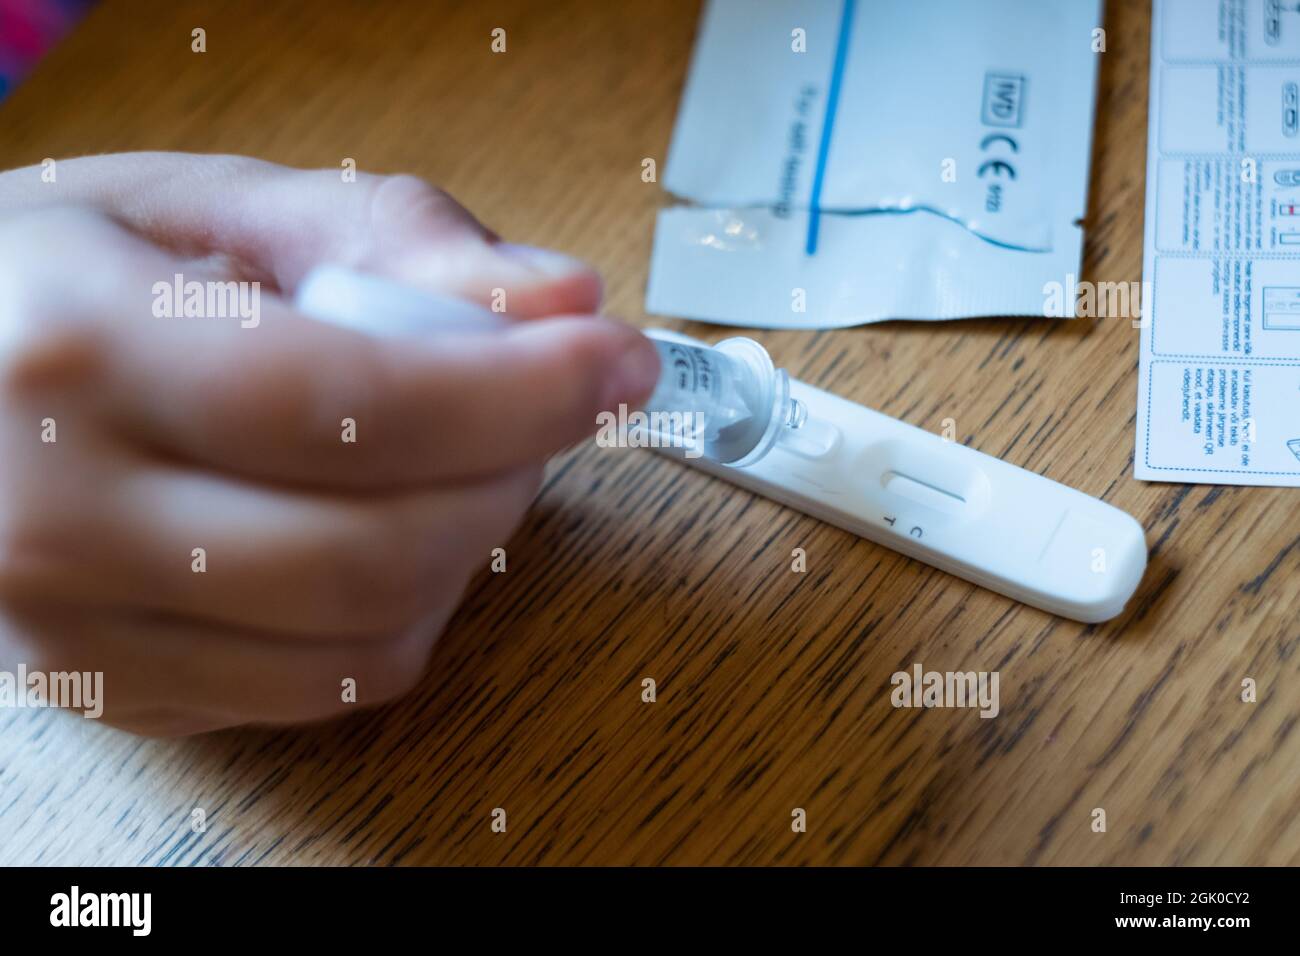 COVID-19 Ag Test kit for self-testing. Child testing herself for coronavirus at home. Stock Photo